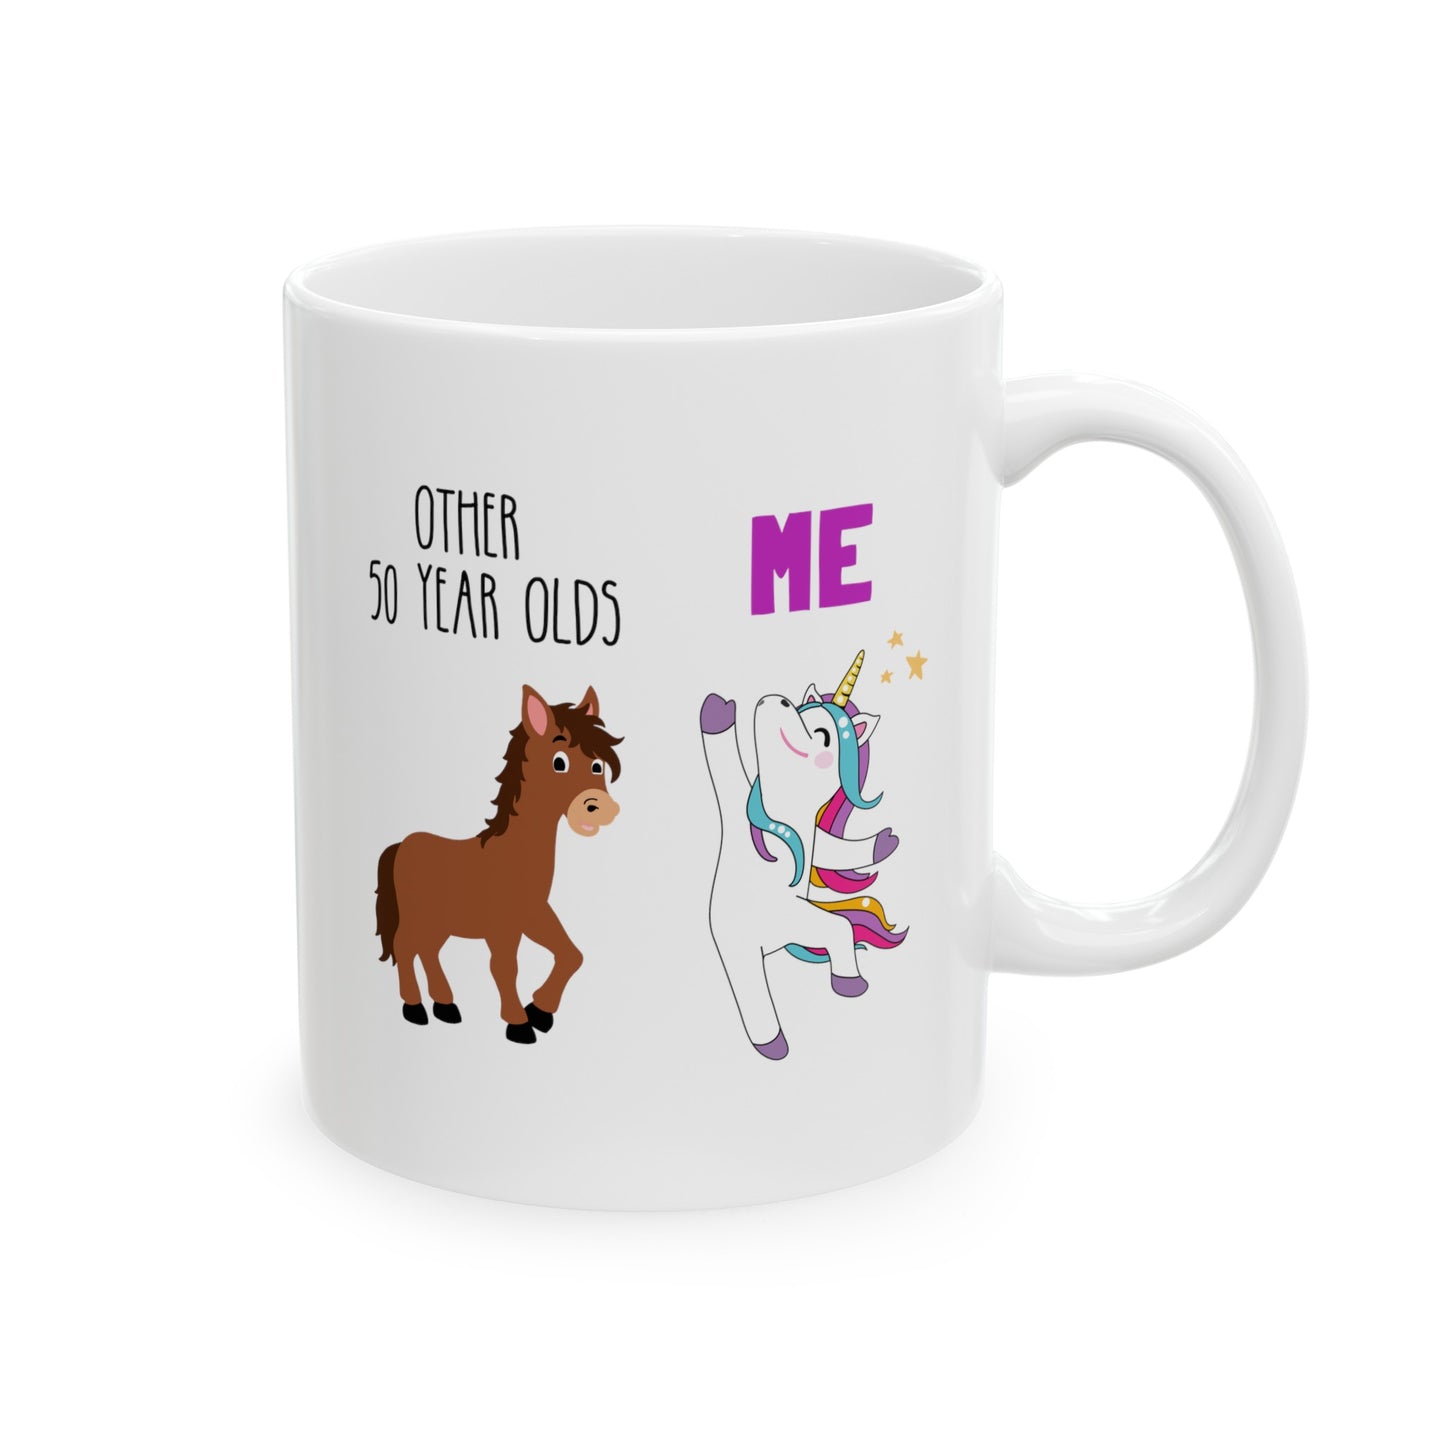 Other 50 Year Olds Vs Me 11oz white funny large coffee mug gift for friend family birthday personalized custom age horse unicorn waveywares wavey wares wavywares wavy wares